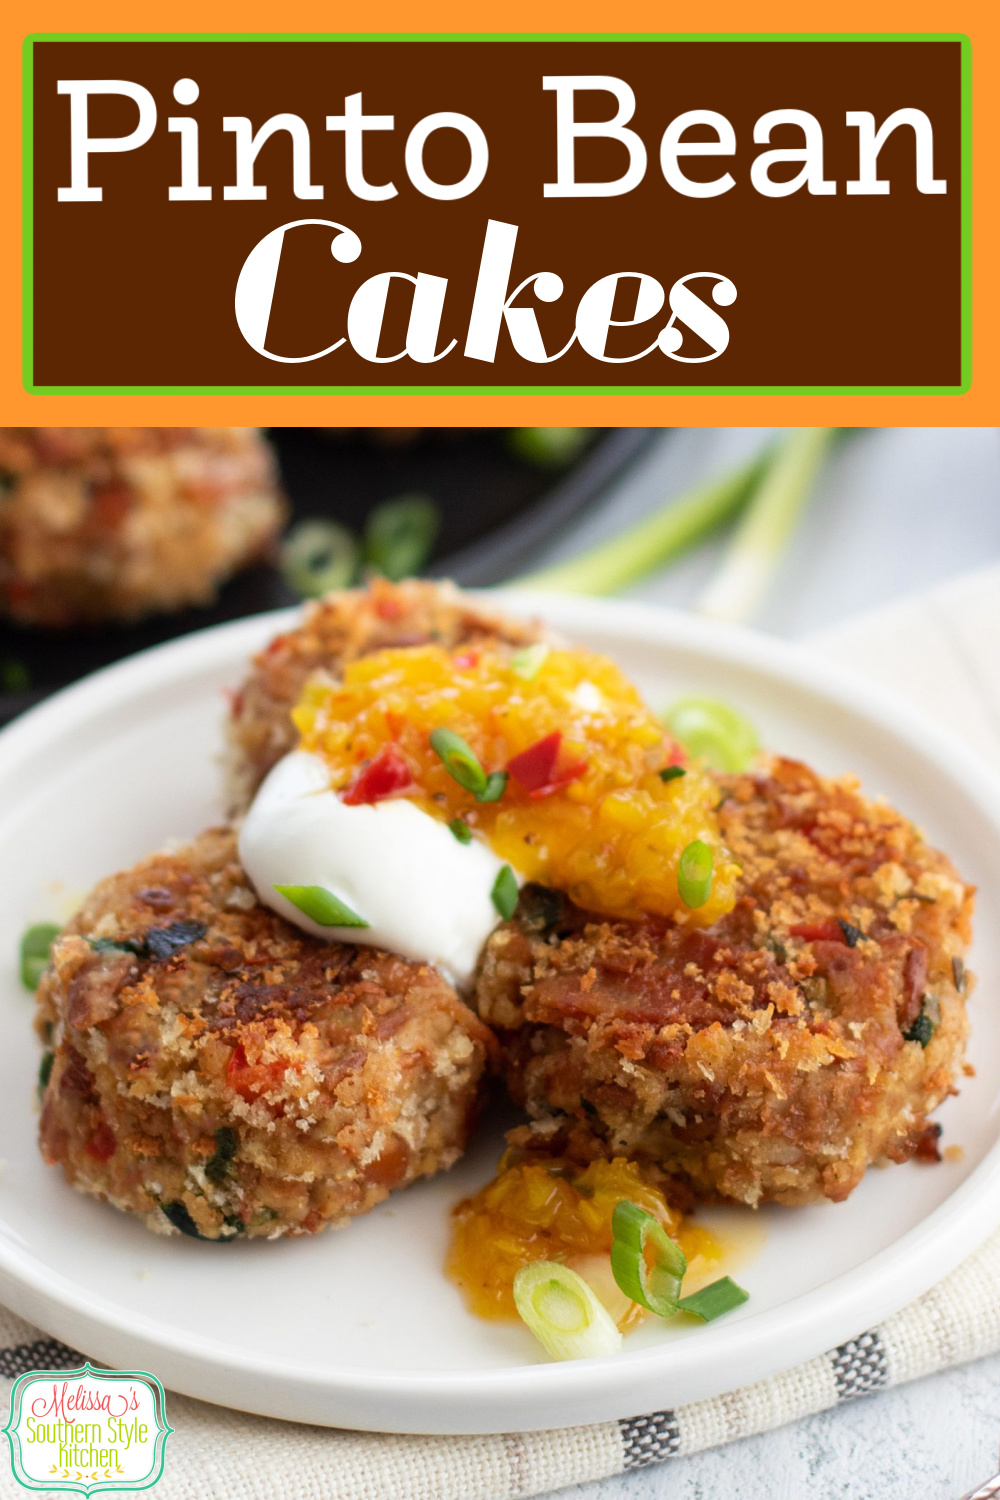 This easy Pinto Bean Cakes recipe elevates inexpensive pinto beans turning them into a delicious and impressive round two meal #pintobeancakes #beancakes #brownbeans #pintobeansrecipes #easybeanscakes #howtomkebeancakes via @melissasssk